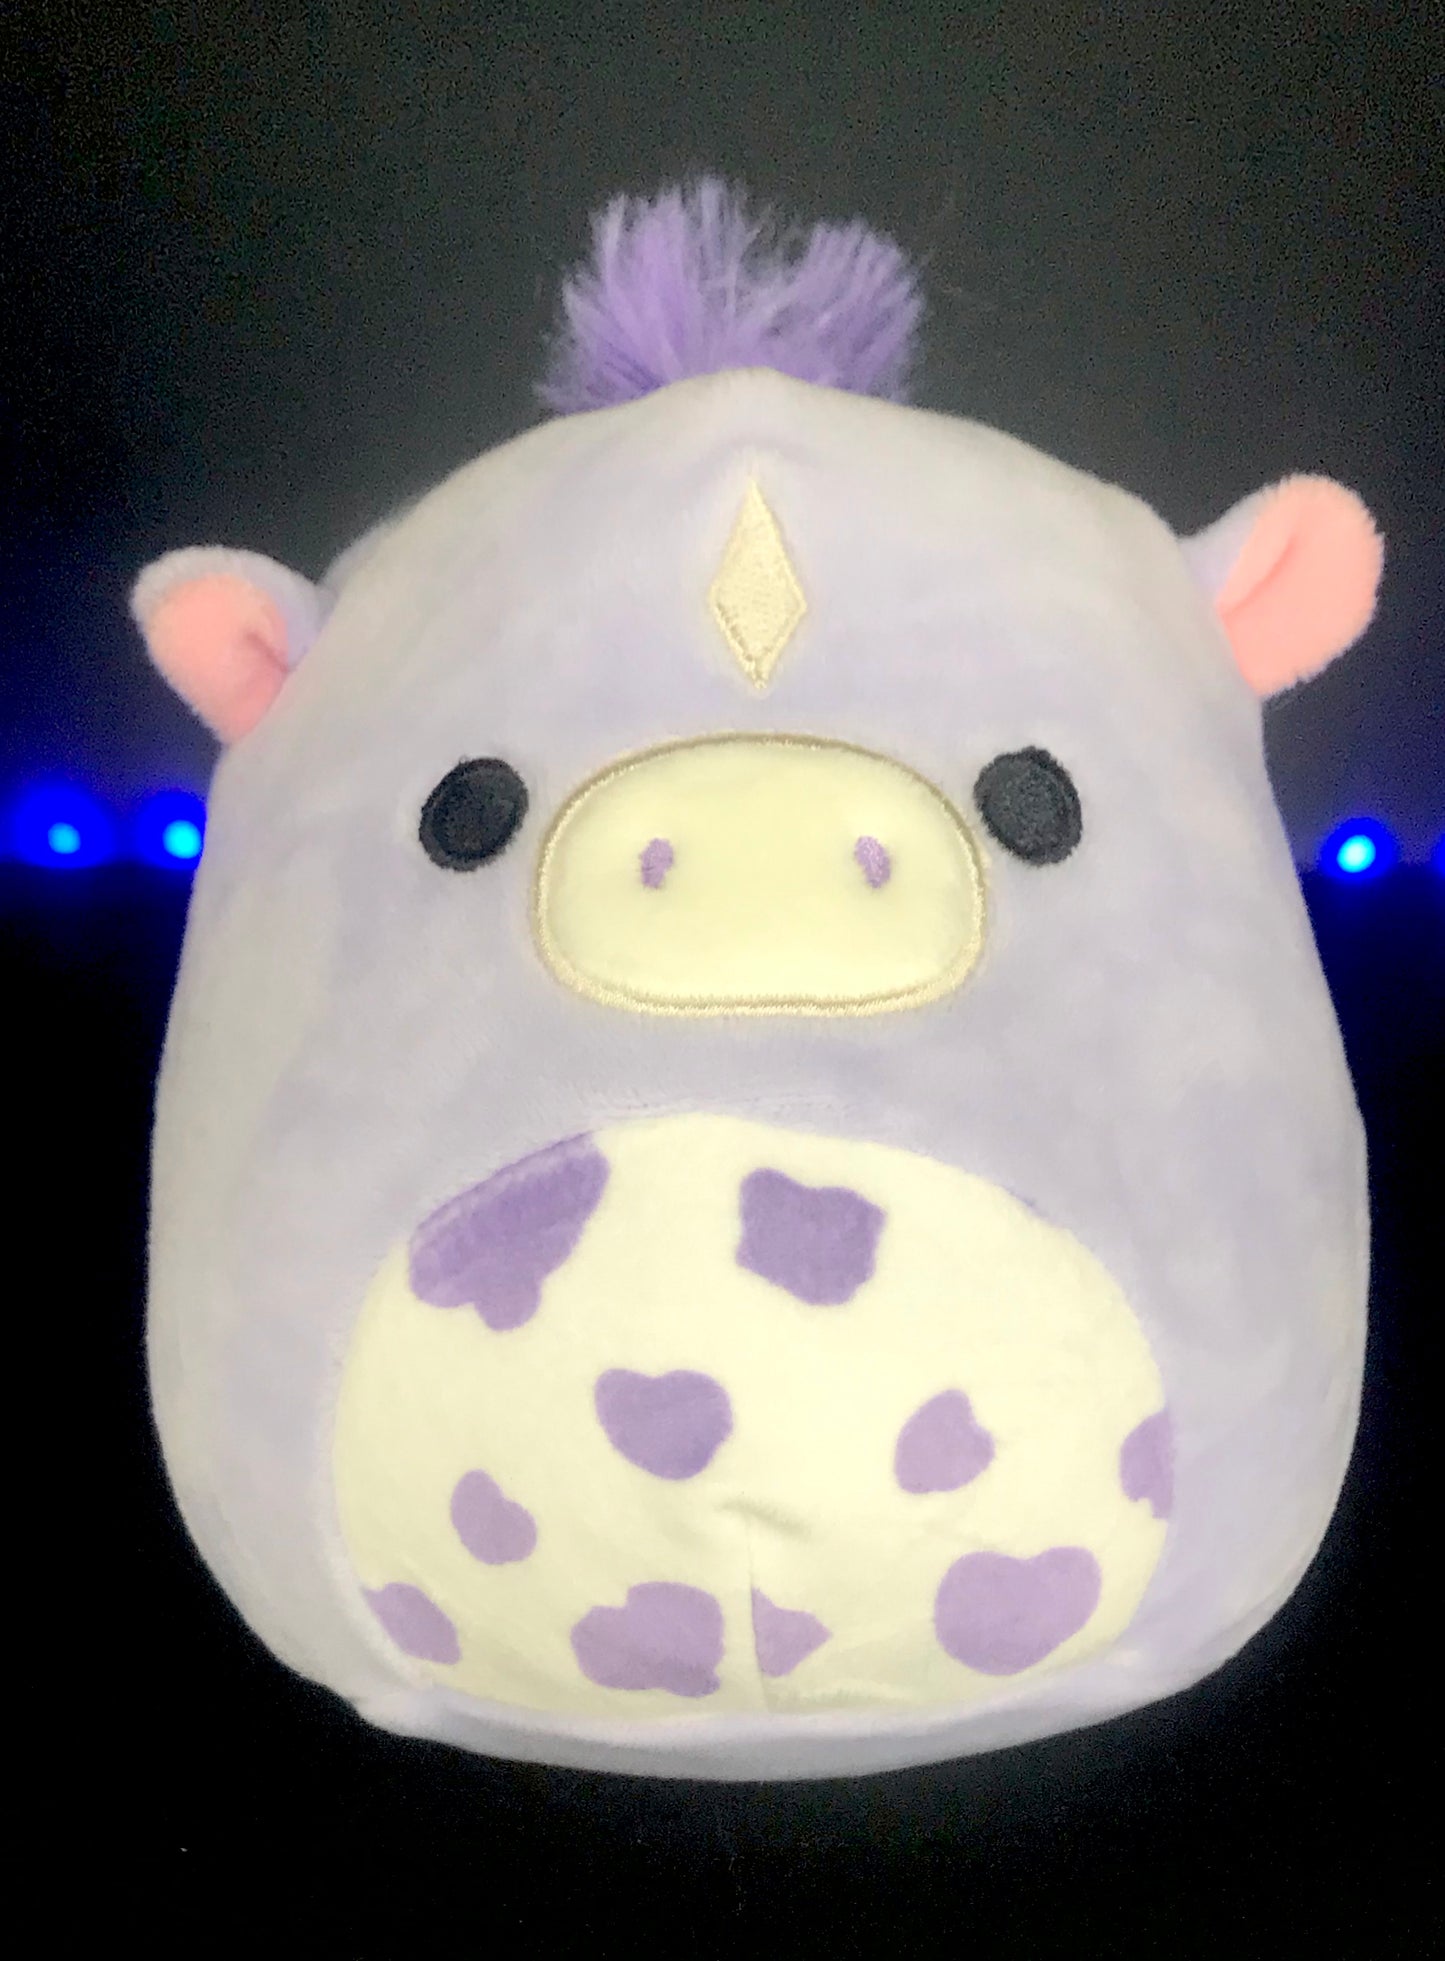 Squishmallow 5” Meadow the Horse